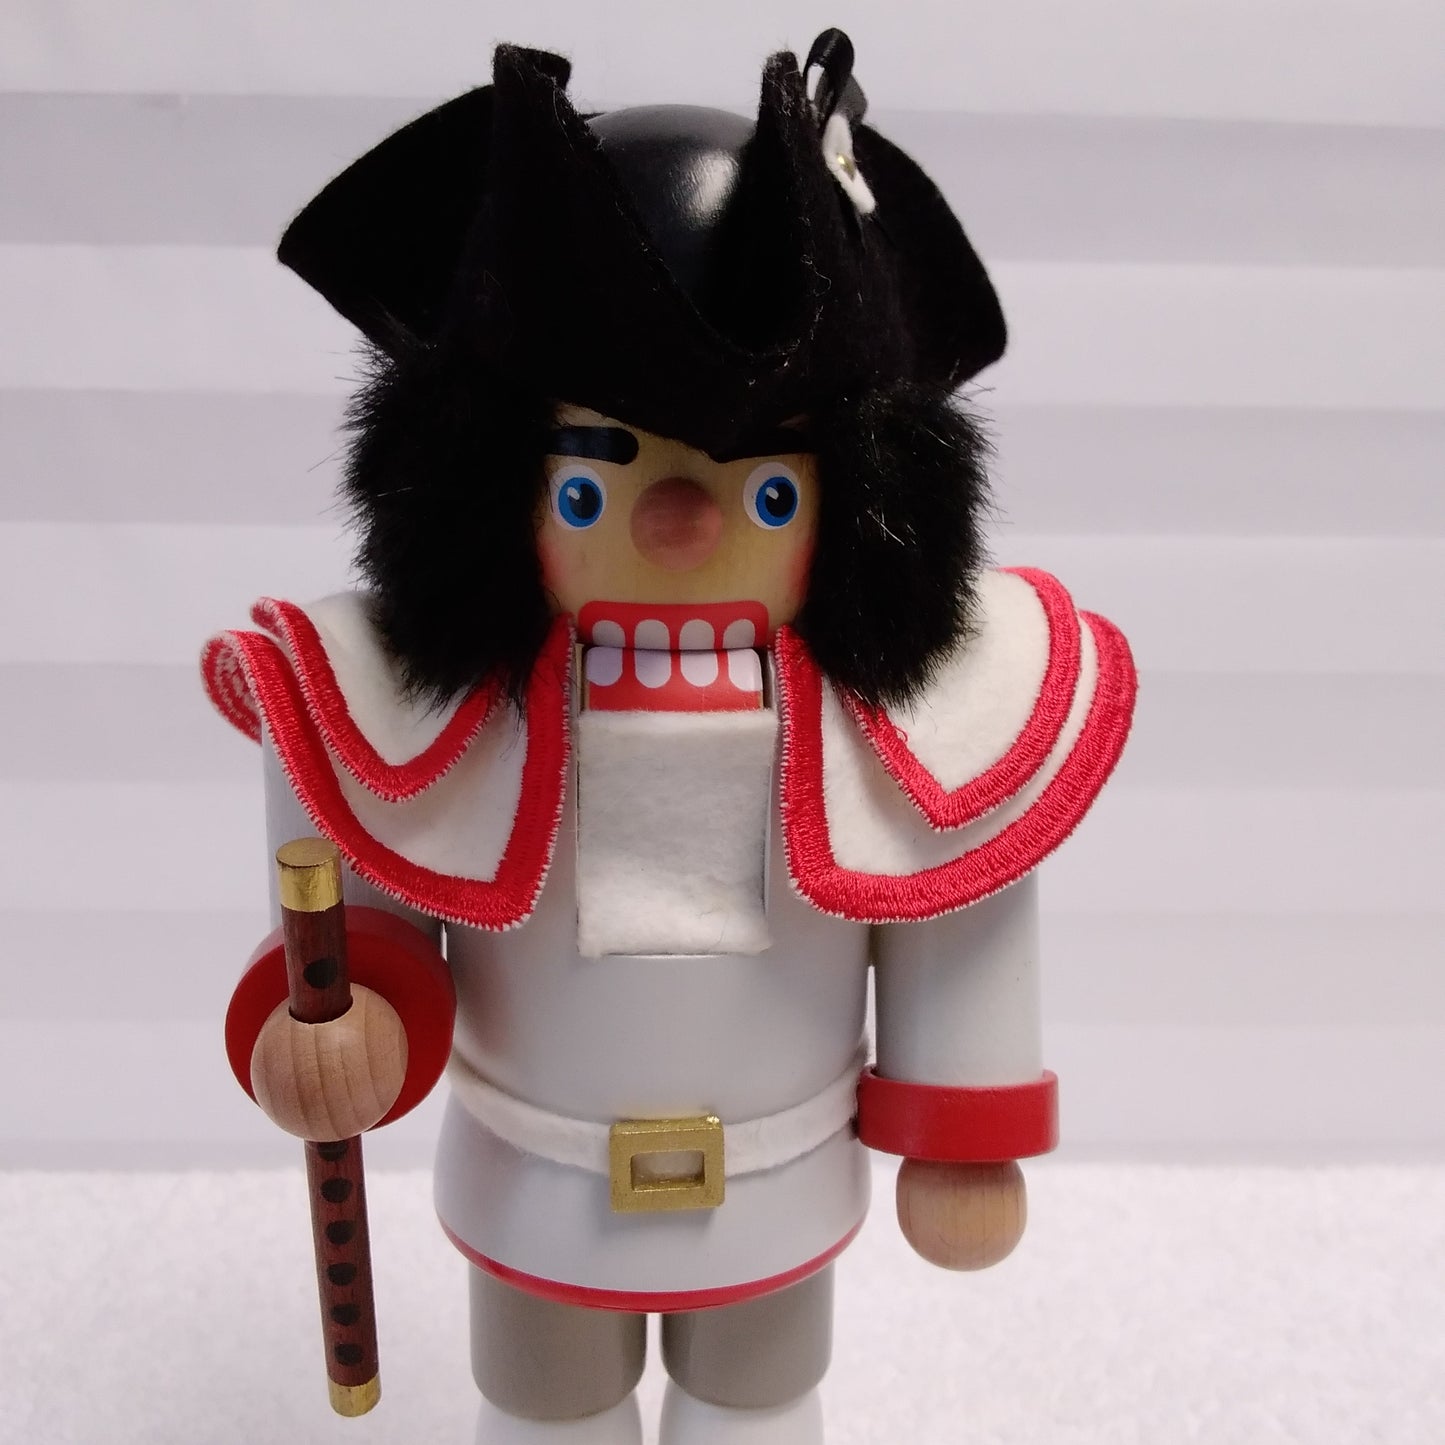 RARE - Signed Christian Ulbricht Nutcracker Wearing a White Jacket with Red Trim Holding a Flute